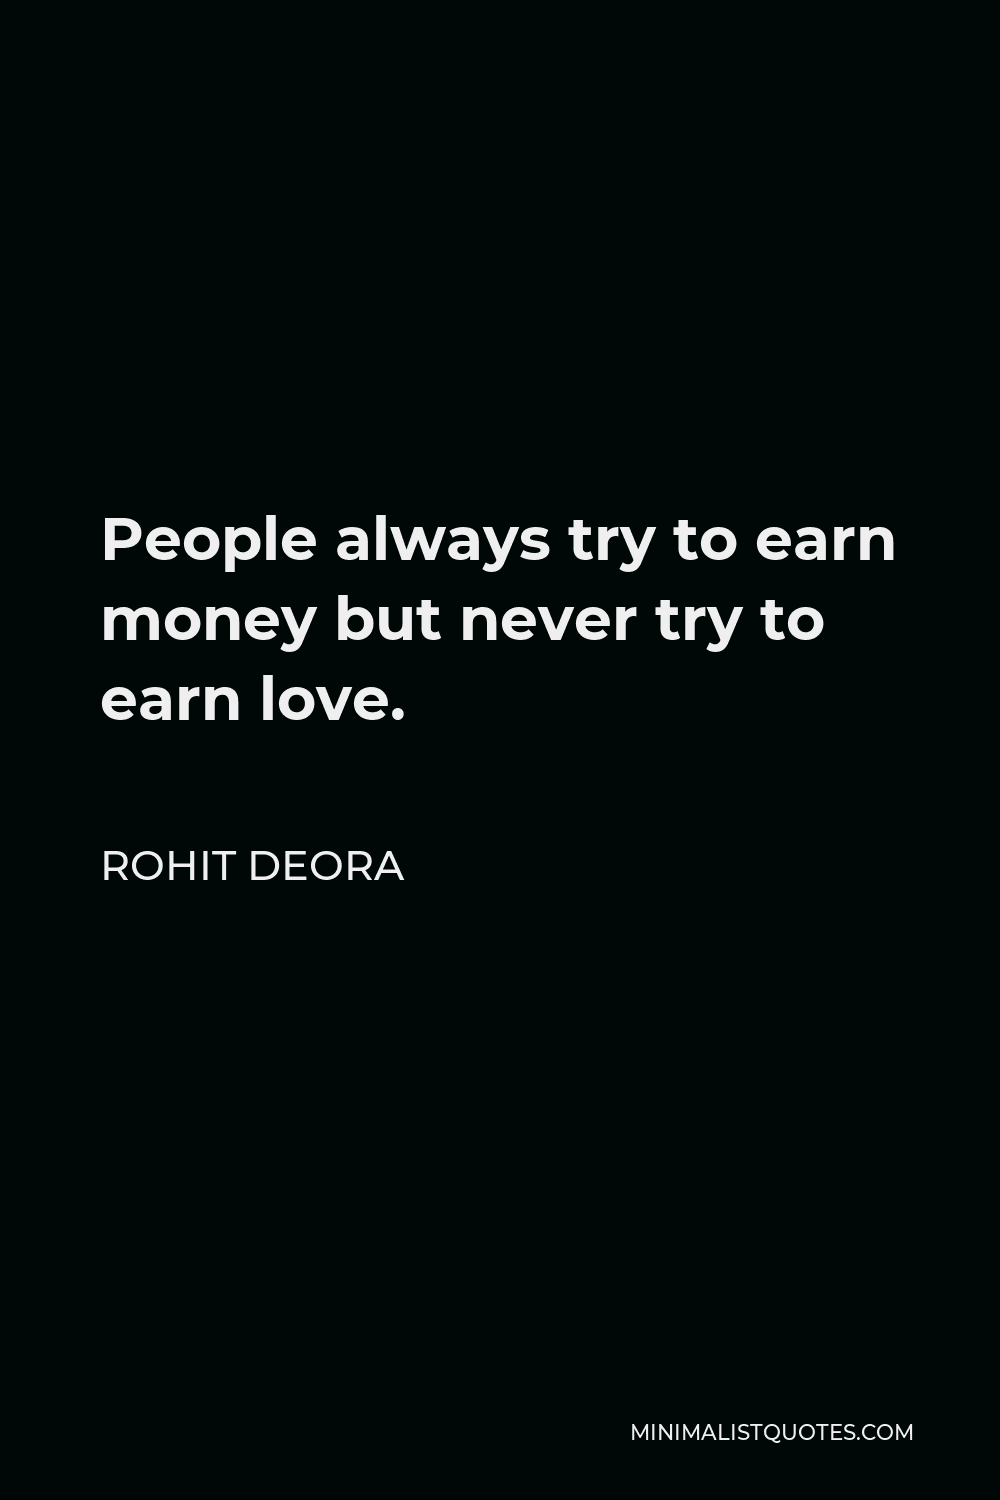 Rohit Deora Quote - People always try to earn money but never try to earn love.